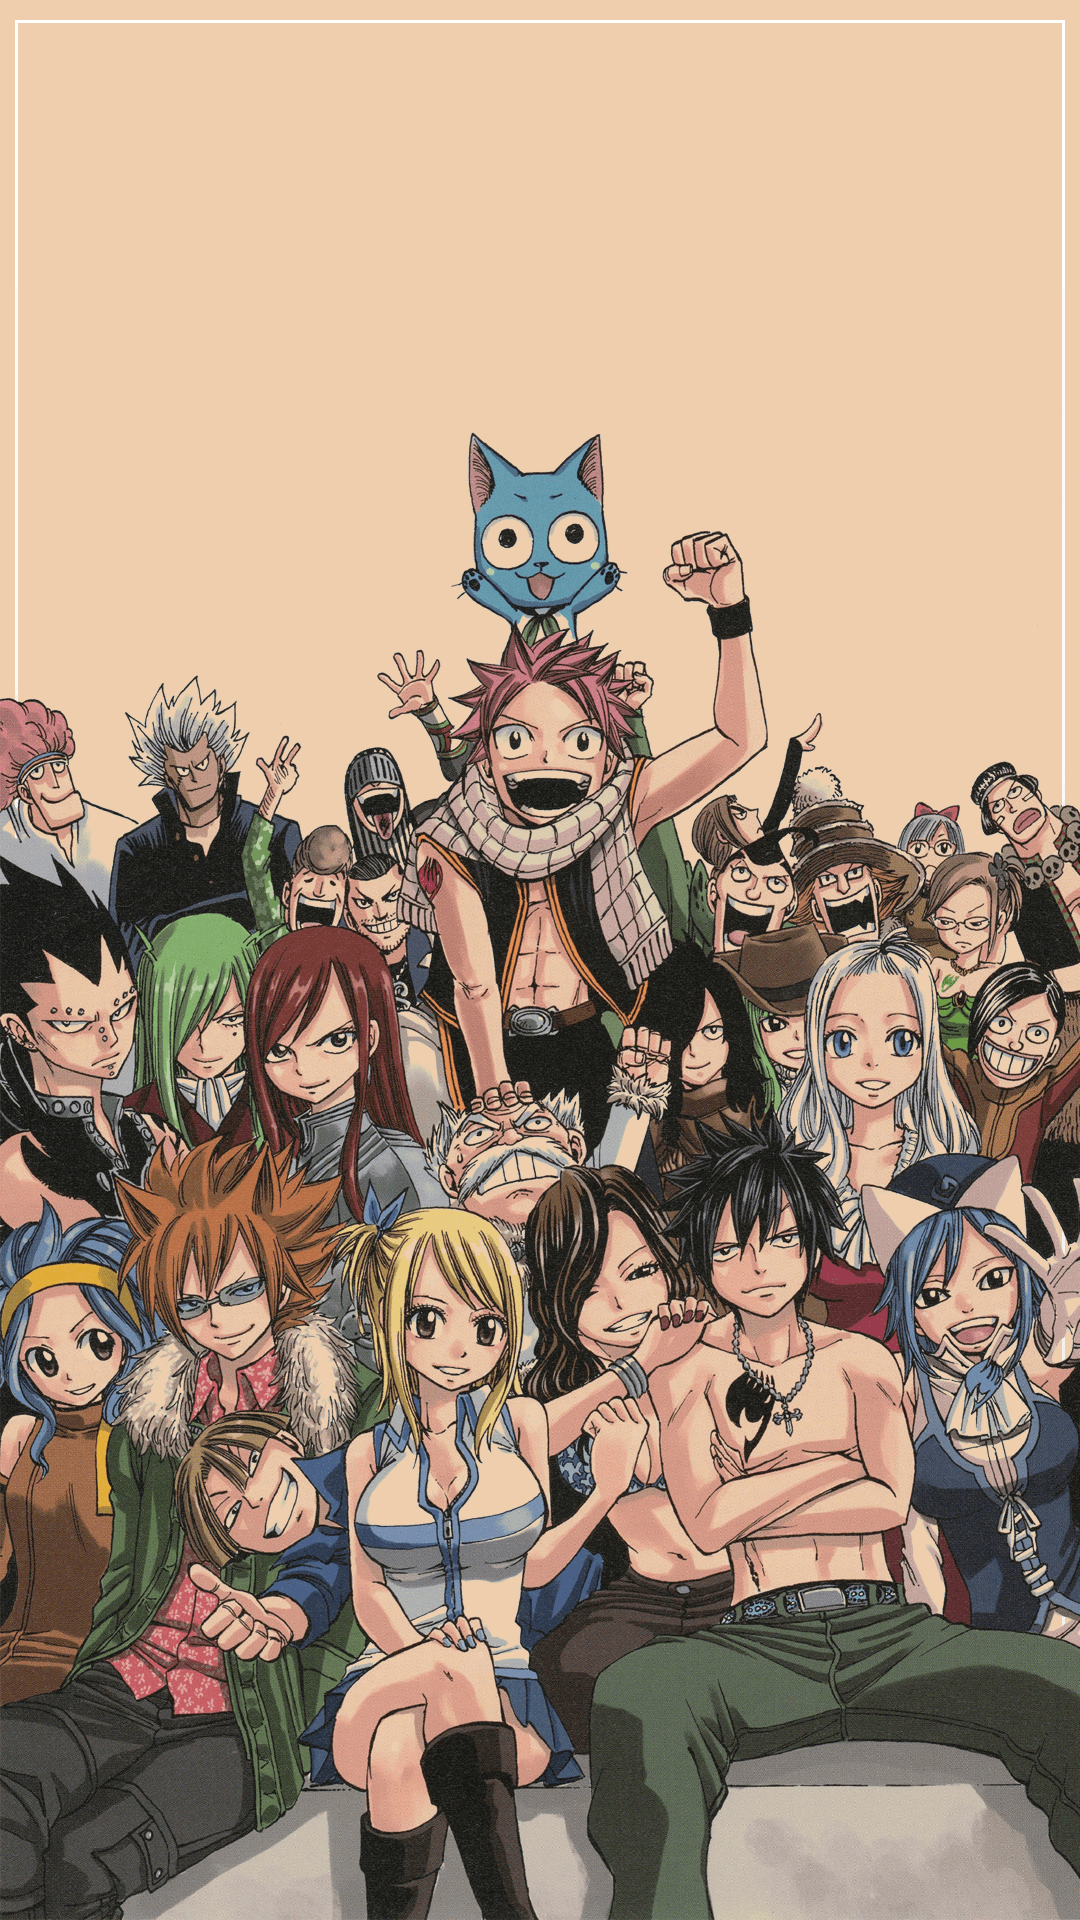 Fairy Tail  Natsu Dragneel One Year Later 2K wallpaper download